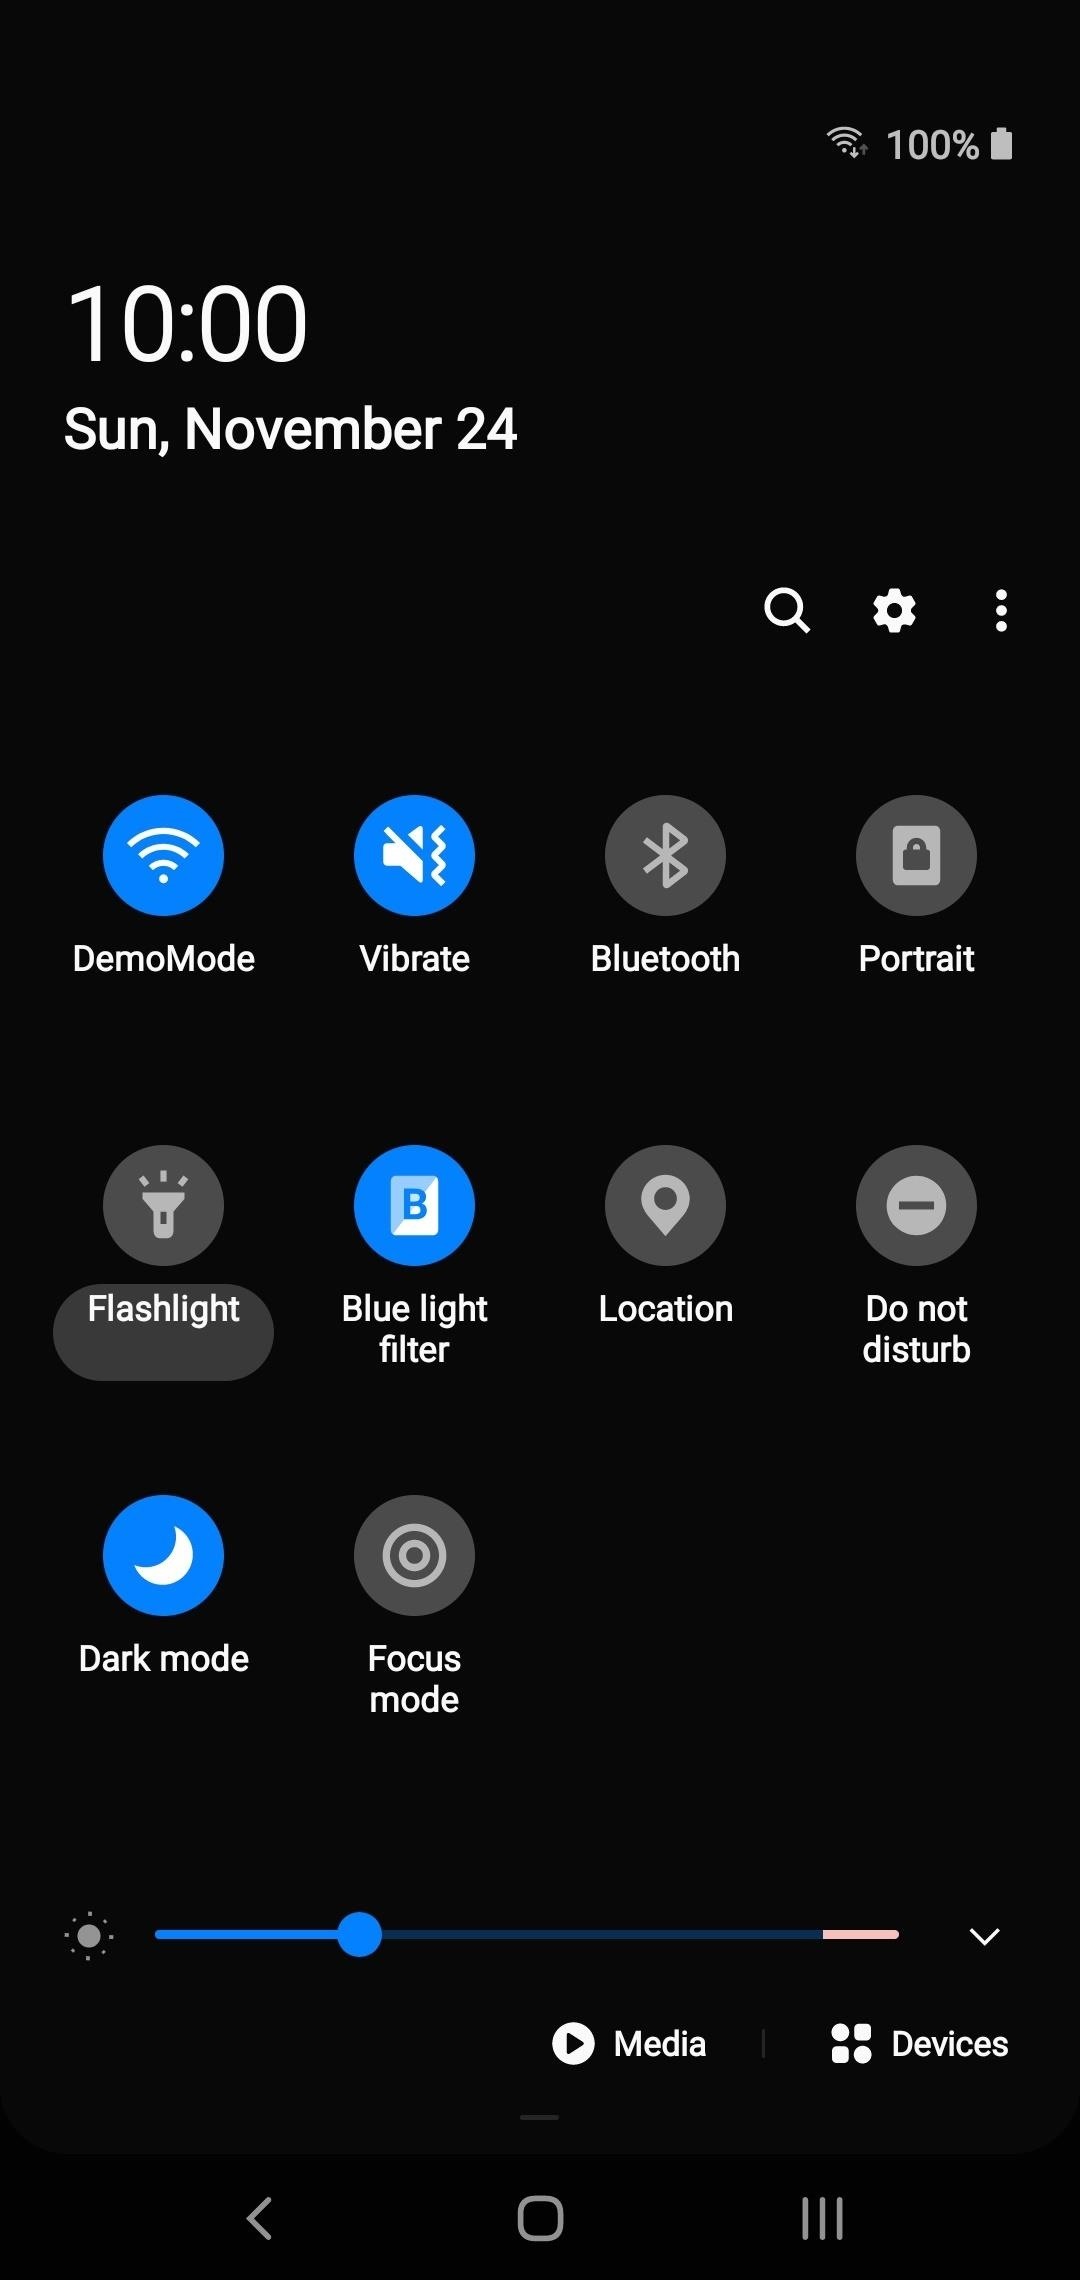 There's an Easy Way to Change Flashlight Brightness on Your Galaxy Phone